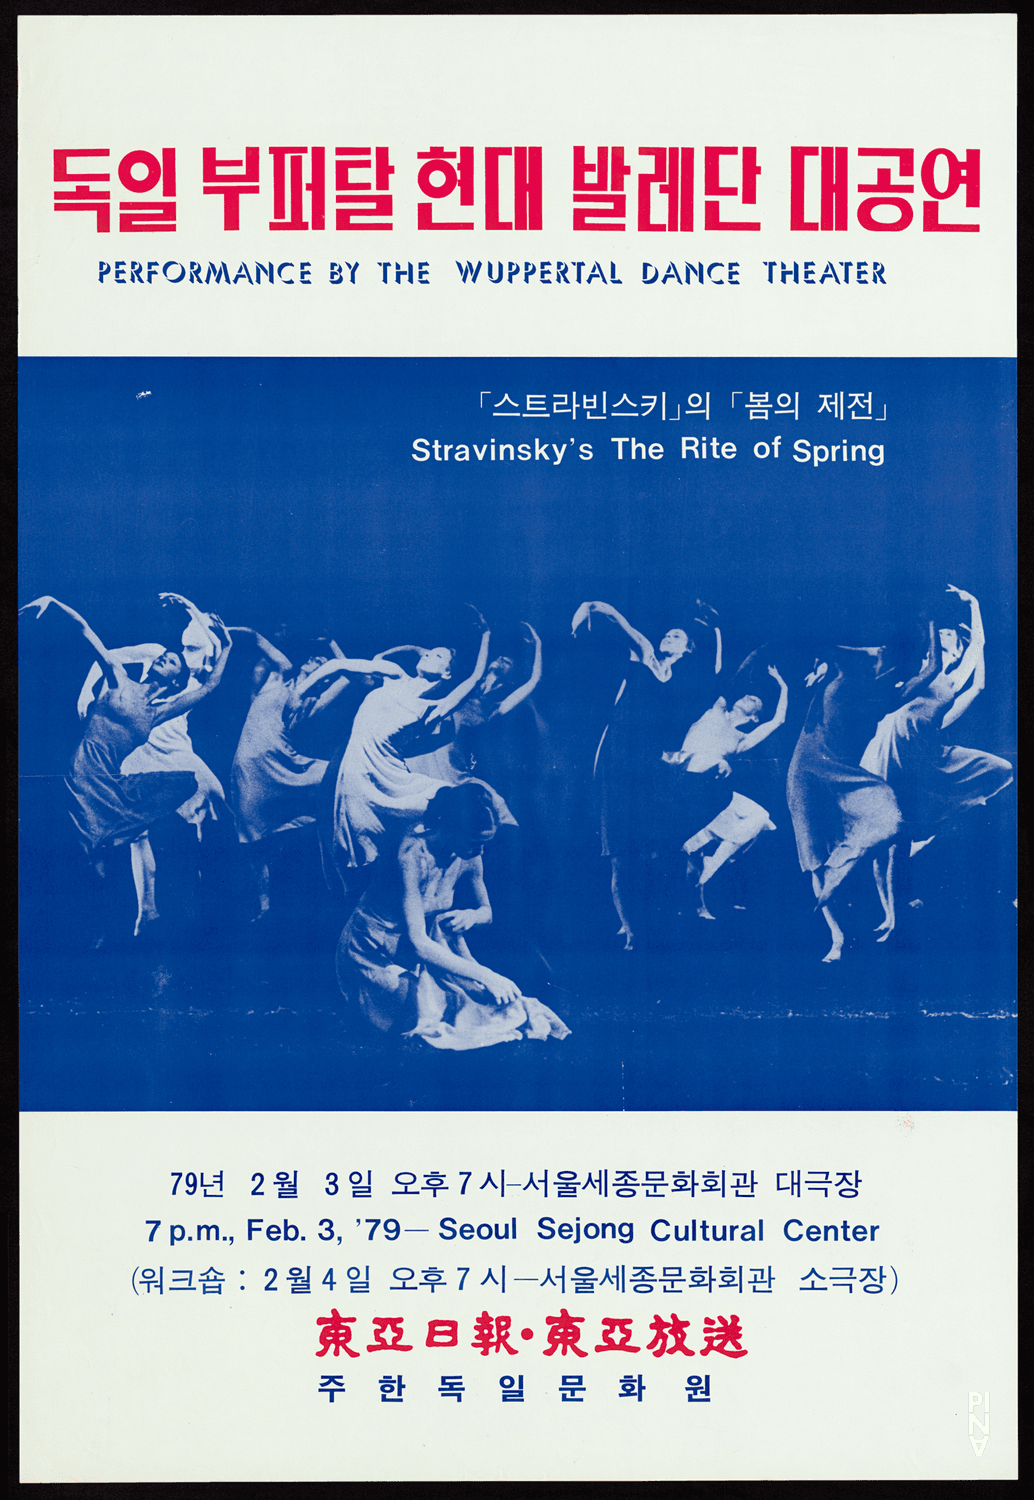 Poster for “The Rite of Spring” by Pina Bausch in Seoul, Feb. 3, 1979